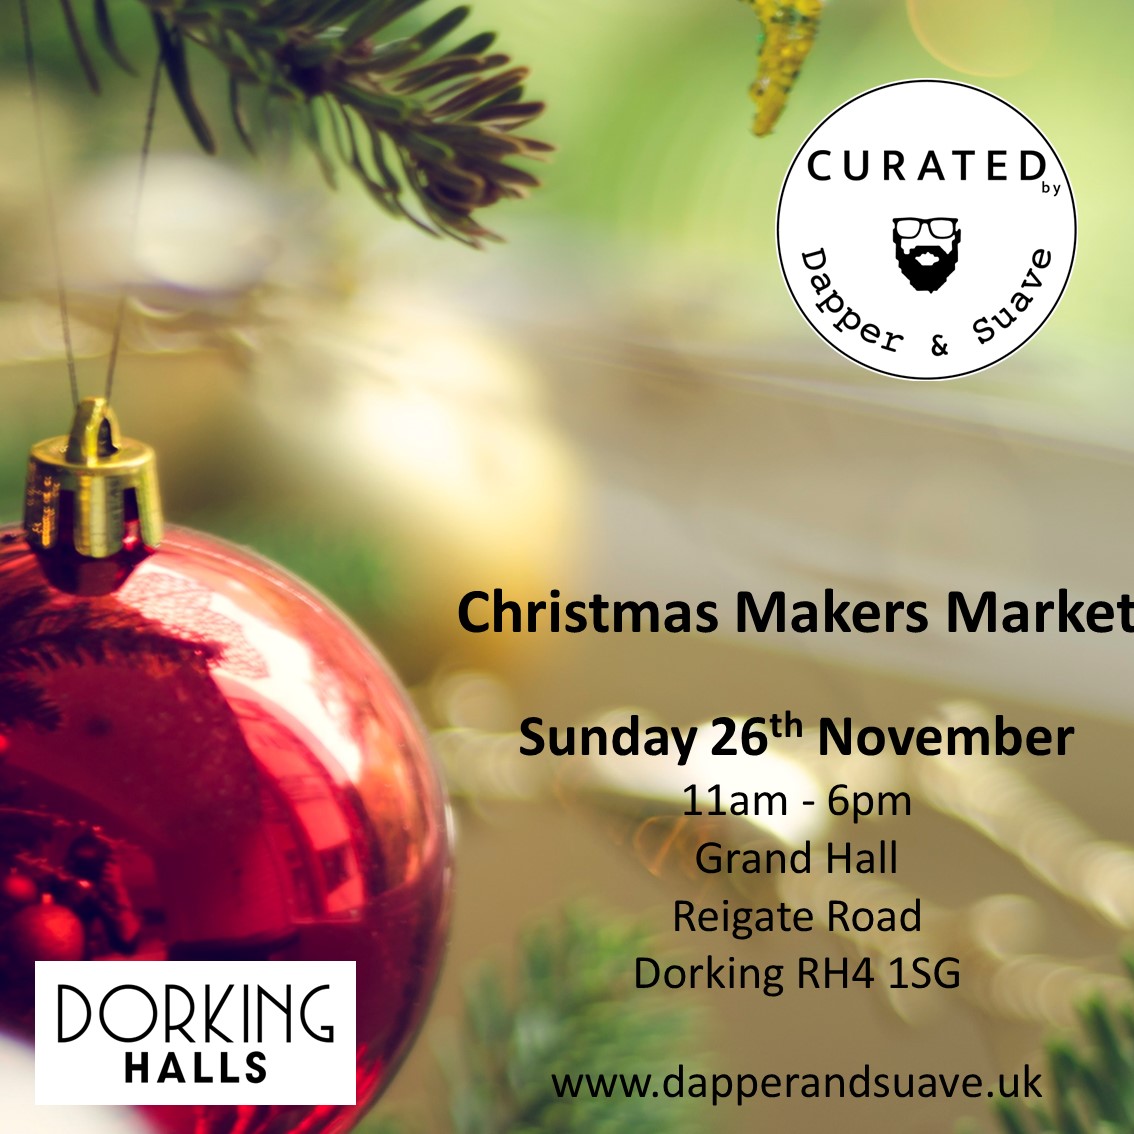 Curated by Dapper & Suave – BIG Christmas Market